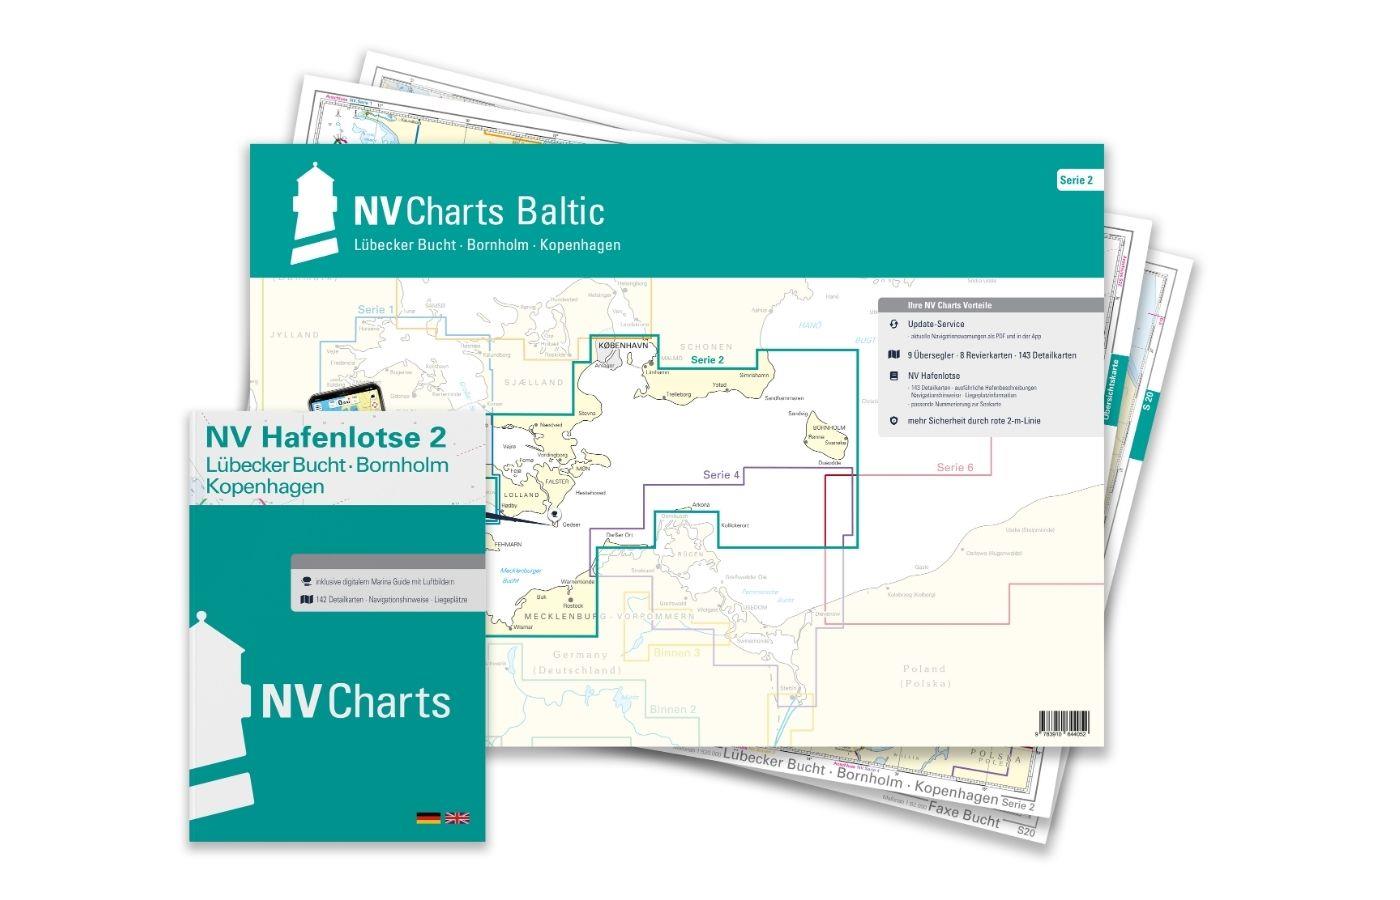 NV Charts Baltic Plano Kartenkoffer Ostsee Serie 1, 2, 3, 4